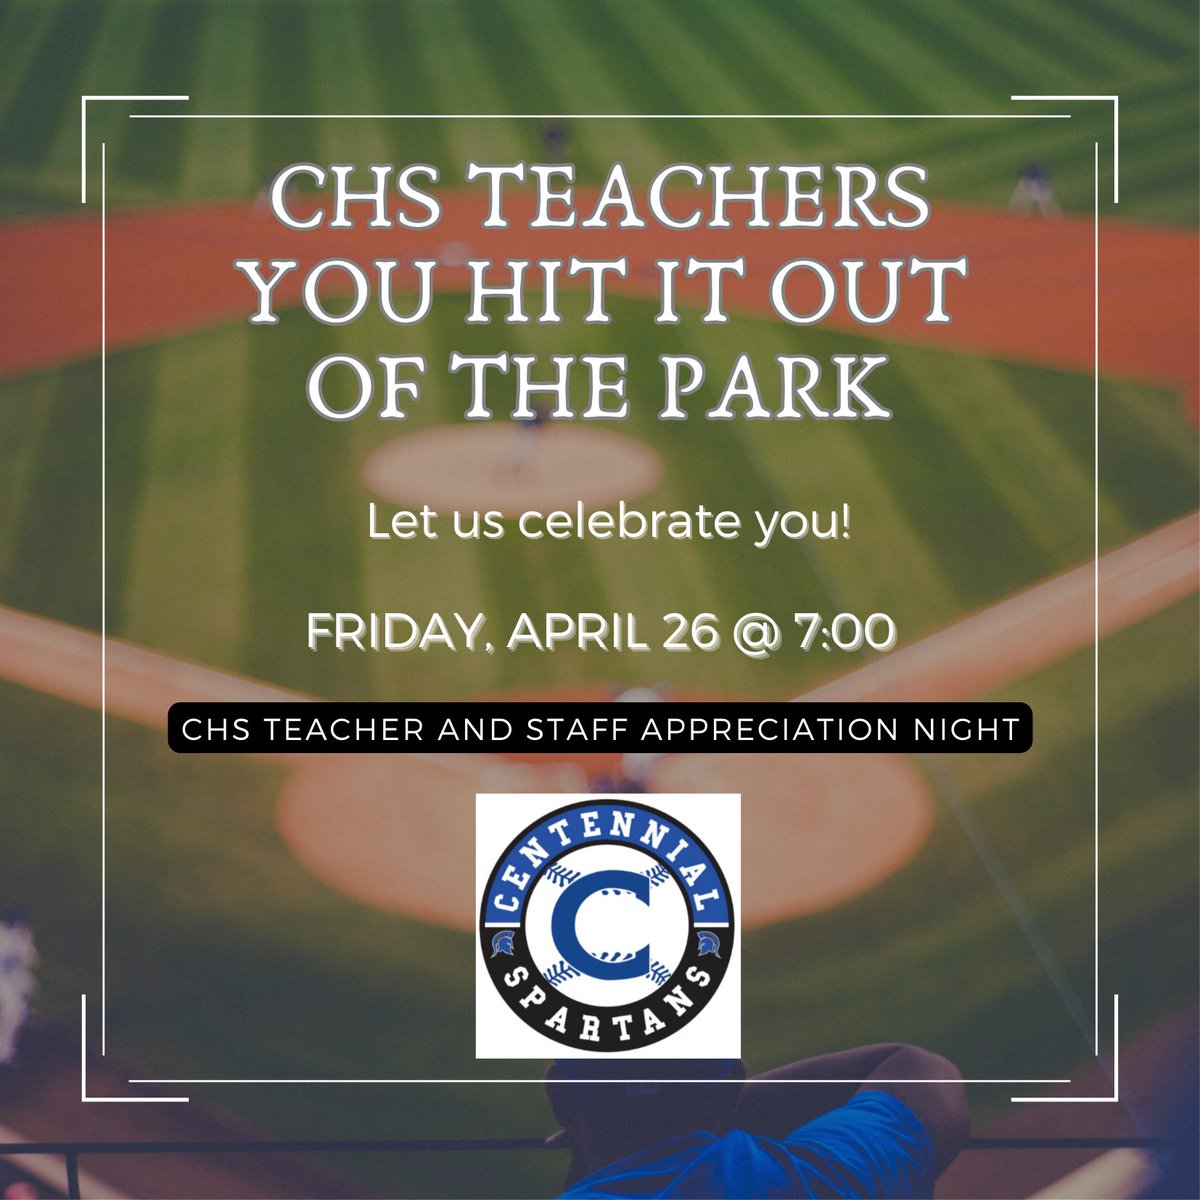 🔹𝓣𝓮𝓪𝓬𝓱𝓮𝓻 𝓐𝓹𝓹𝓻𝓮𝓬𝓲𝓪𝓽𝓲𝓸𝓷 𝓝𝓲𝓰𝓱𝓽🔹 Join us on Friday at 7:00 as we honor the dedication and hard work of our teachers and staff! #SpartanFamily @CHSSpartans